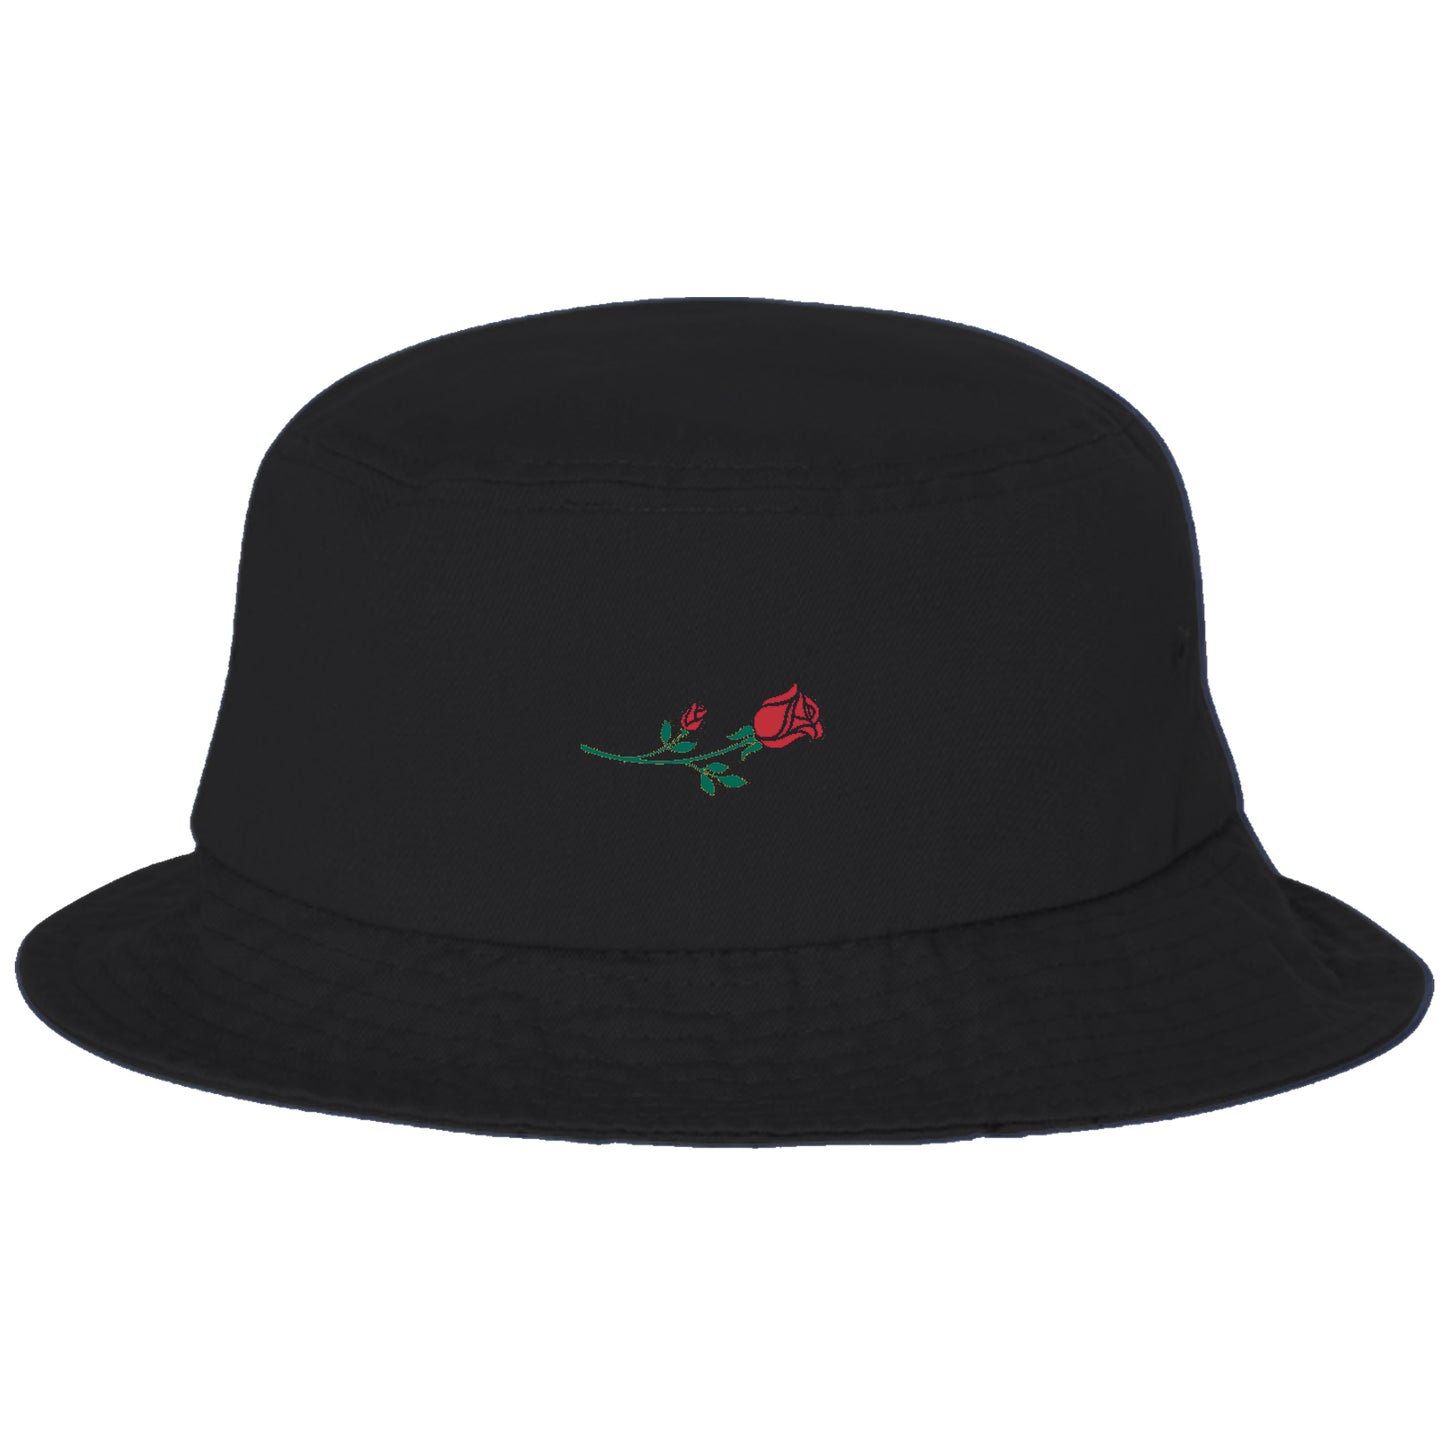 The Rose Bucket Hat